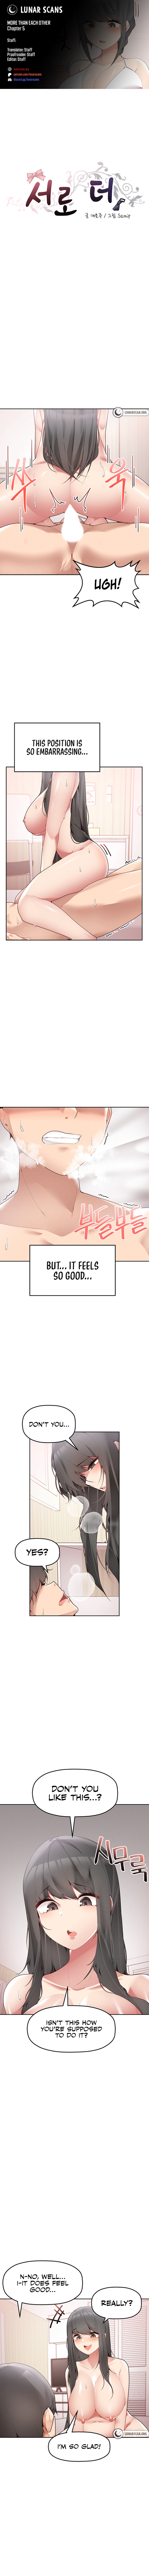 Panel Image 1 for chapter 5 of manhwa More Than Each Other on read.oppai.stream